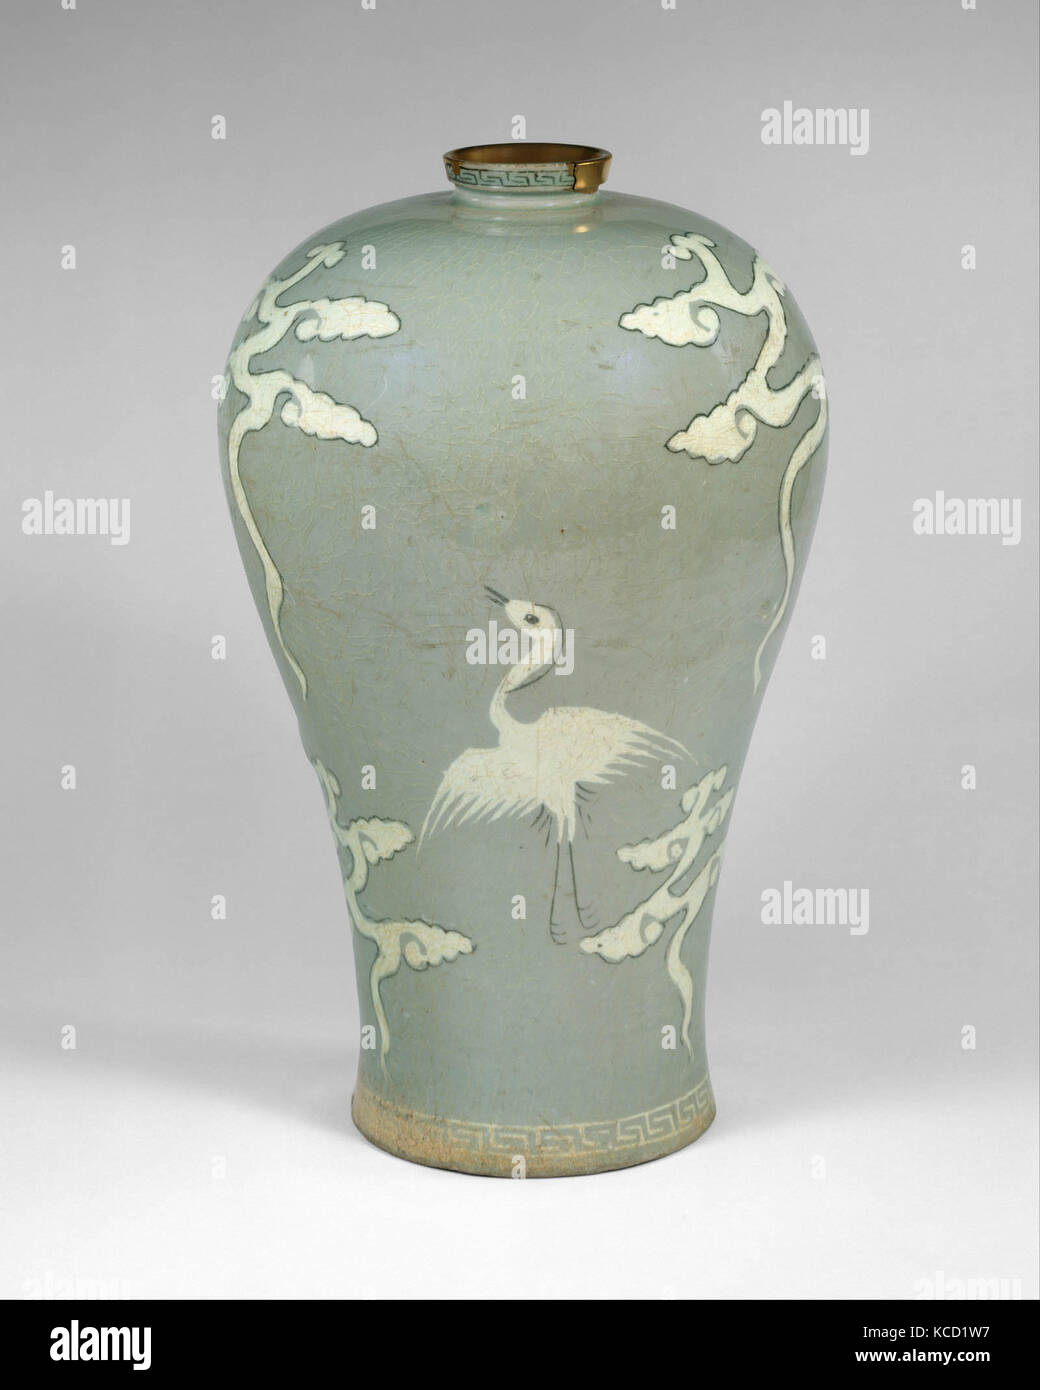 Maebyeong decorated with cranes and clouds, 청자 상감 구름 학 무늬 매병 고려, Goryeo dynasty (918–1392), late 13th century, Korea, Stoneware Stock Photo